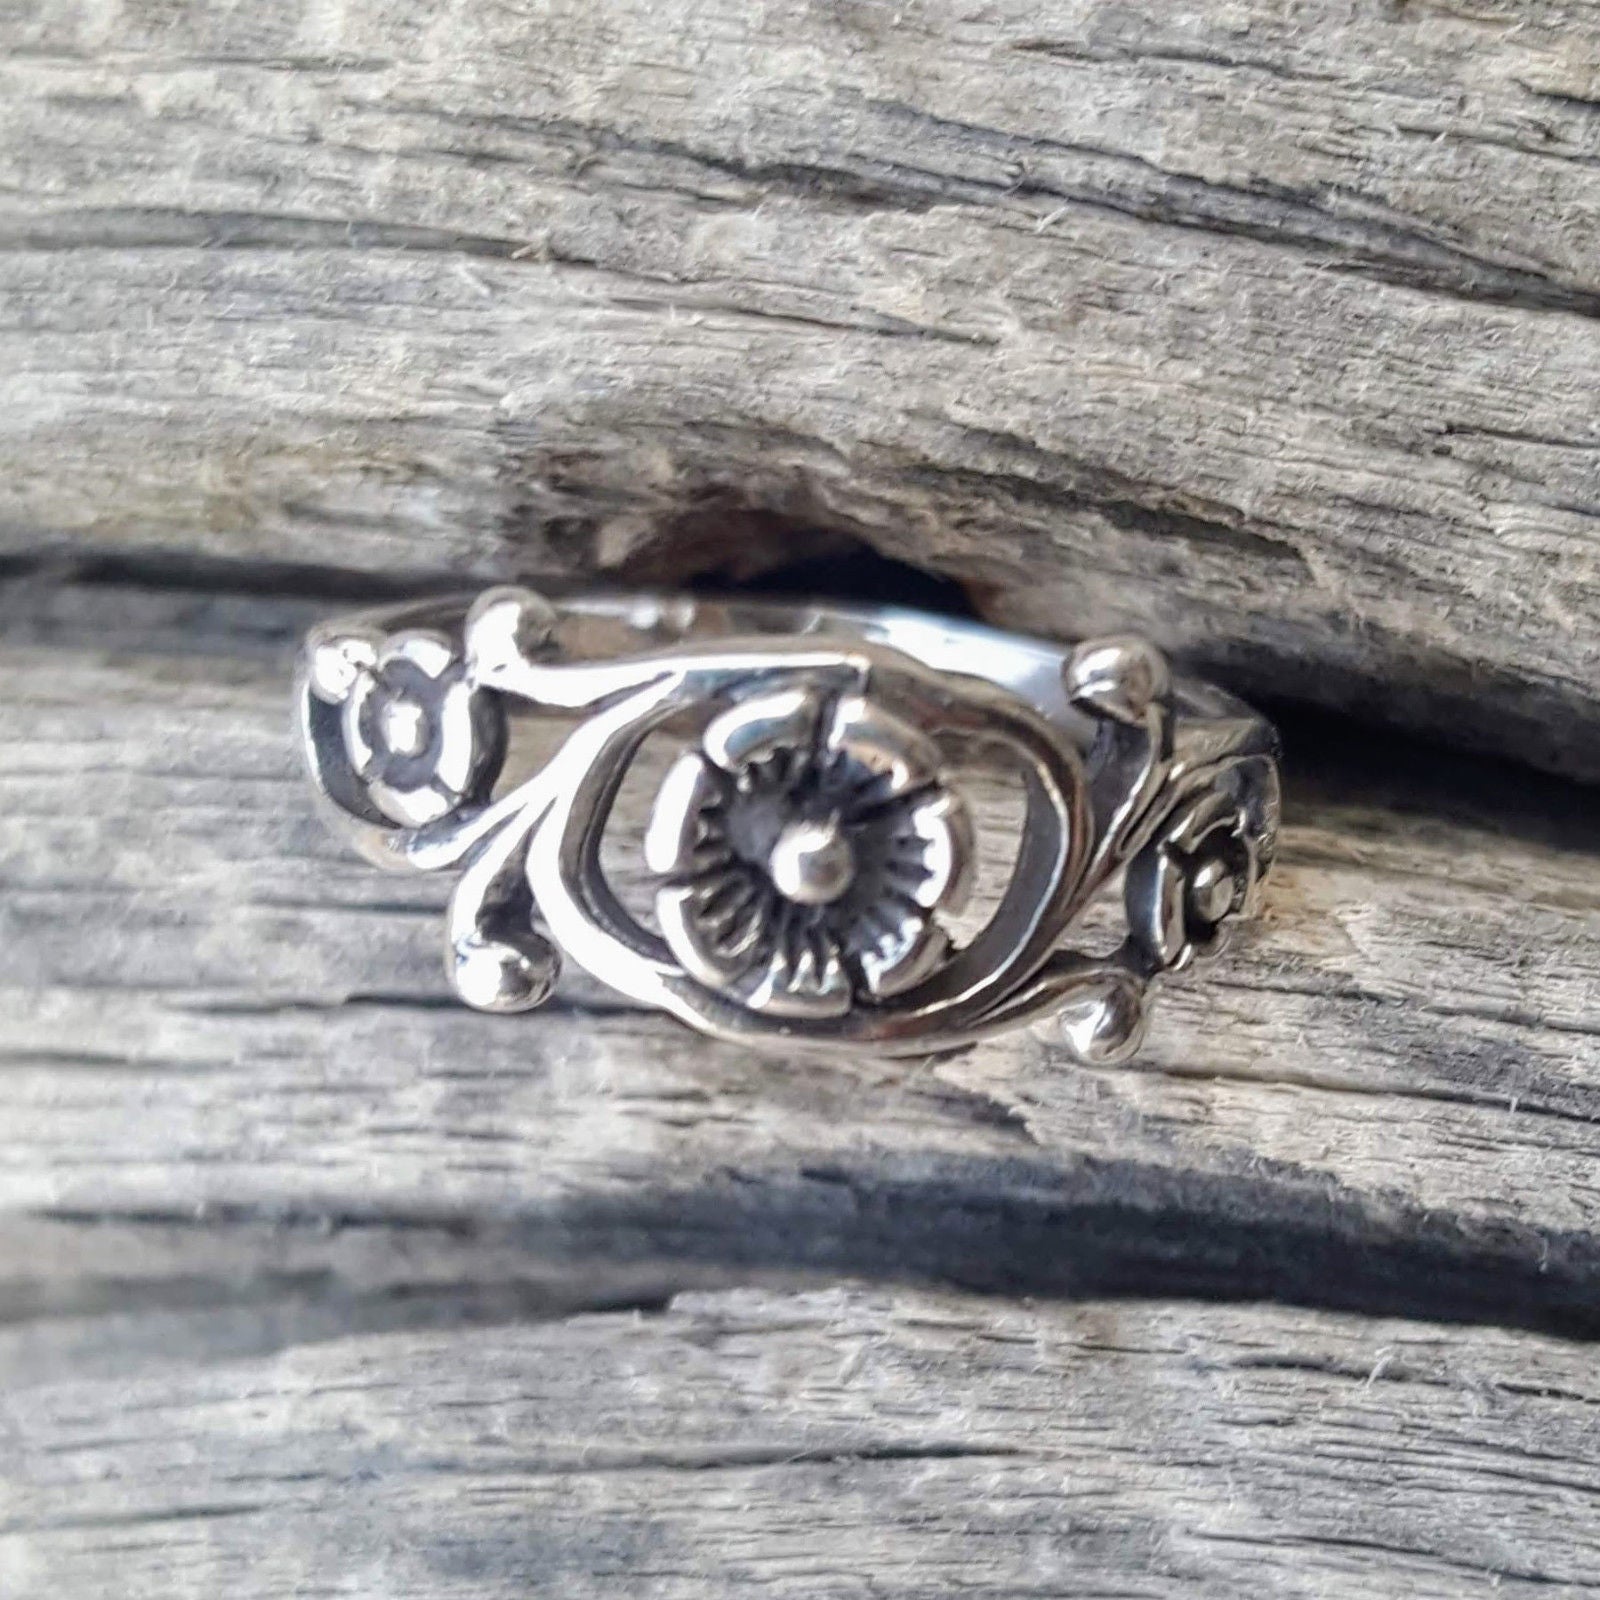 Exquisite swirling vines and leaves showcase an Irish rose.  Wear it for an everyday finger, thumb, or knuckle midi ring.  Metal quality: .925 Sterling Silver with stamped hallmark  Color: Silver  Stones: None  Face height: 7 mm high  Band width: 2 mm band  Kids and Ladies ring size: 4-10